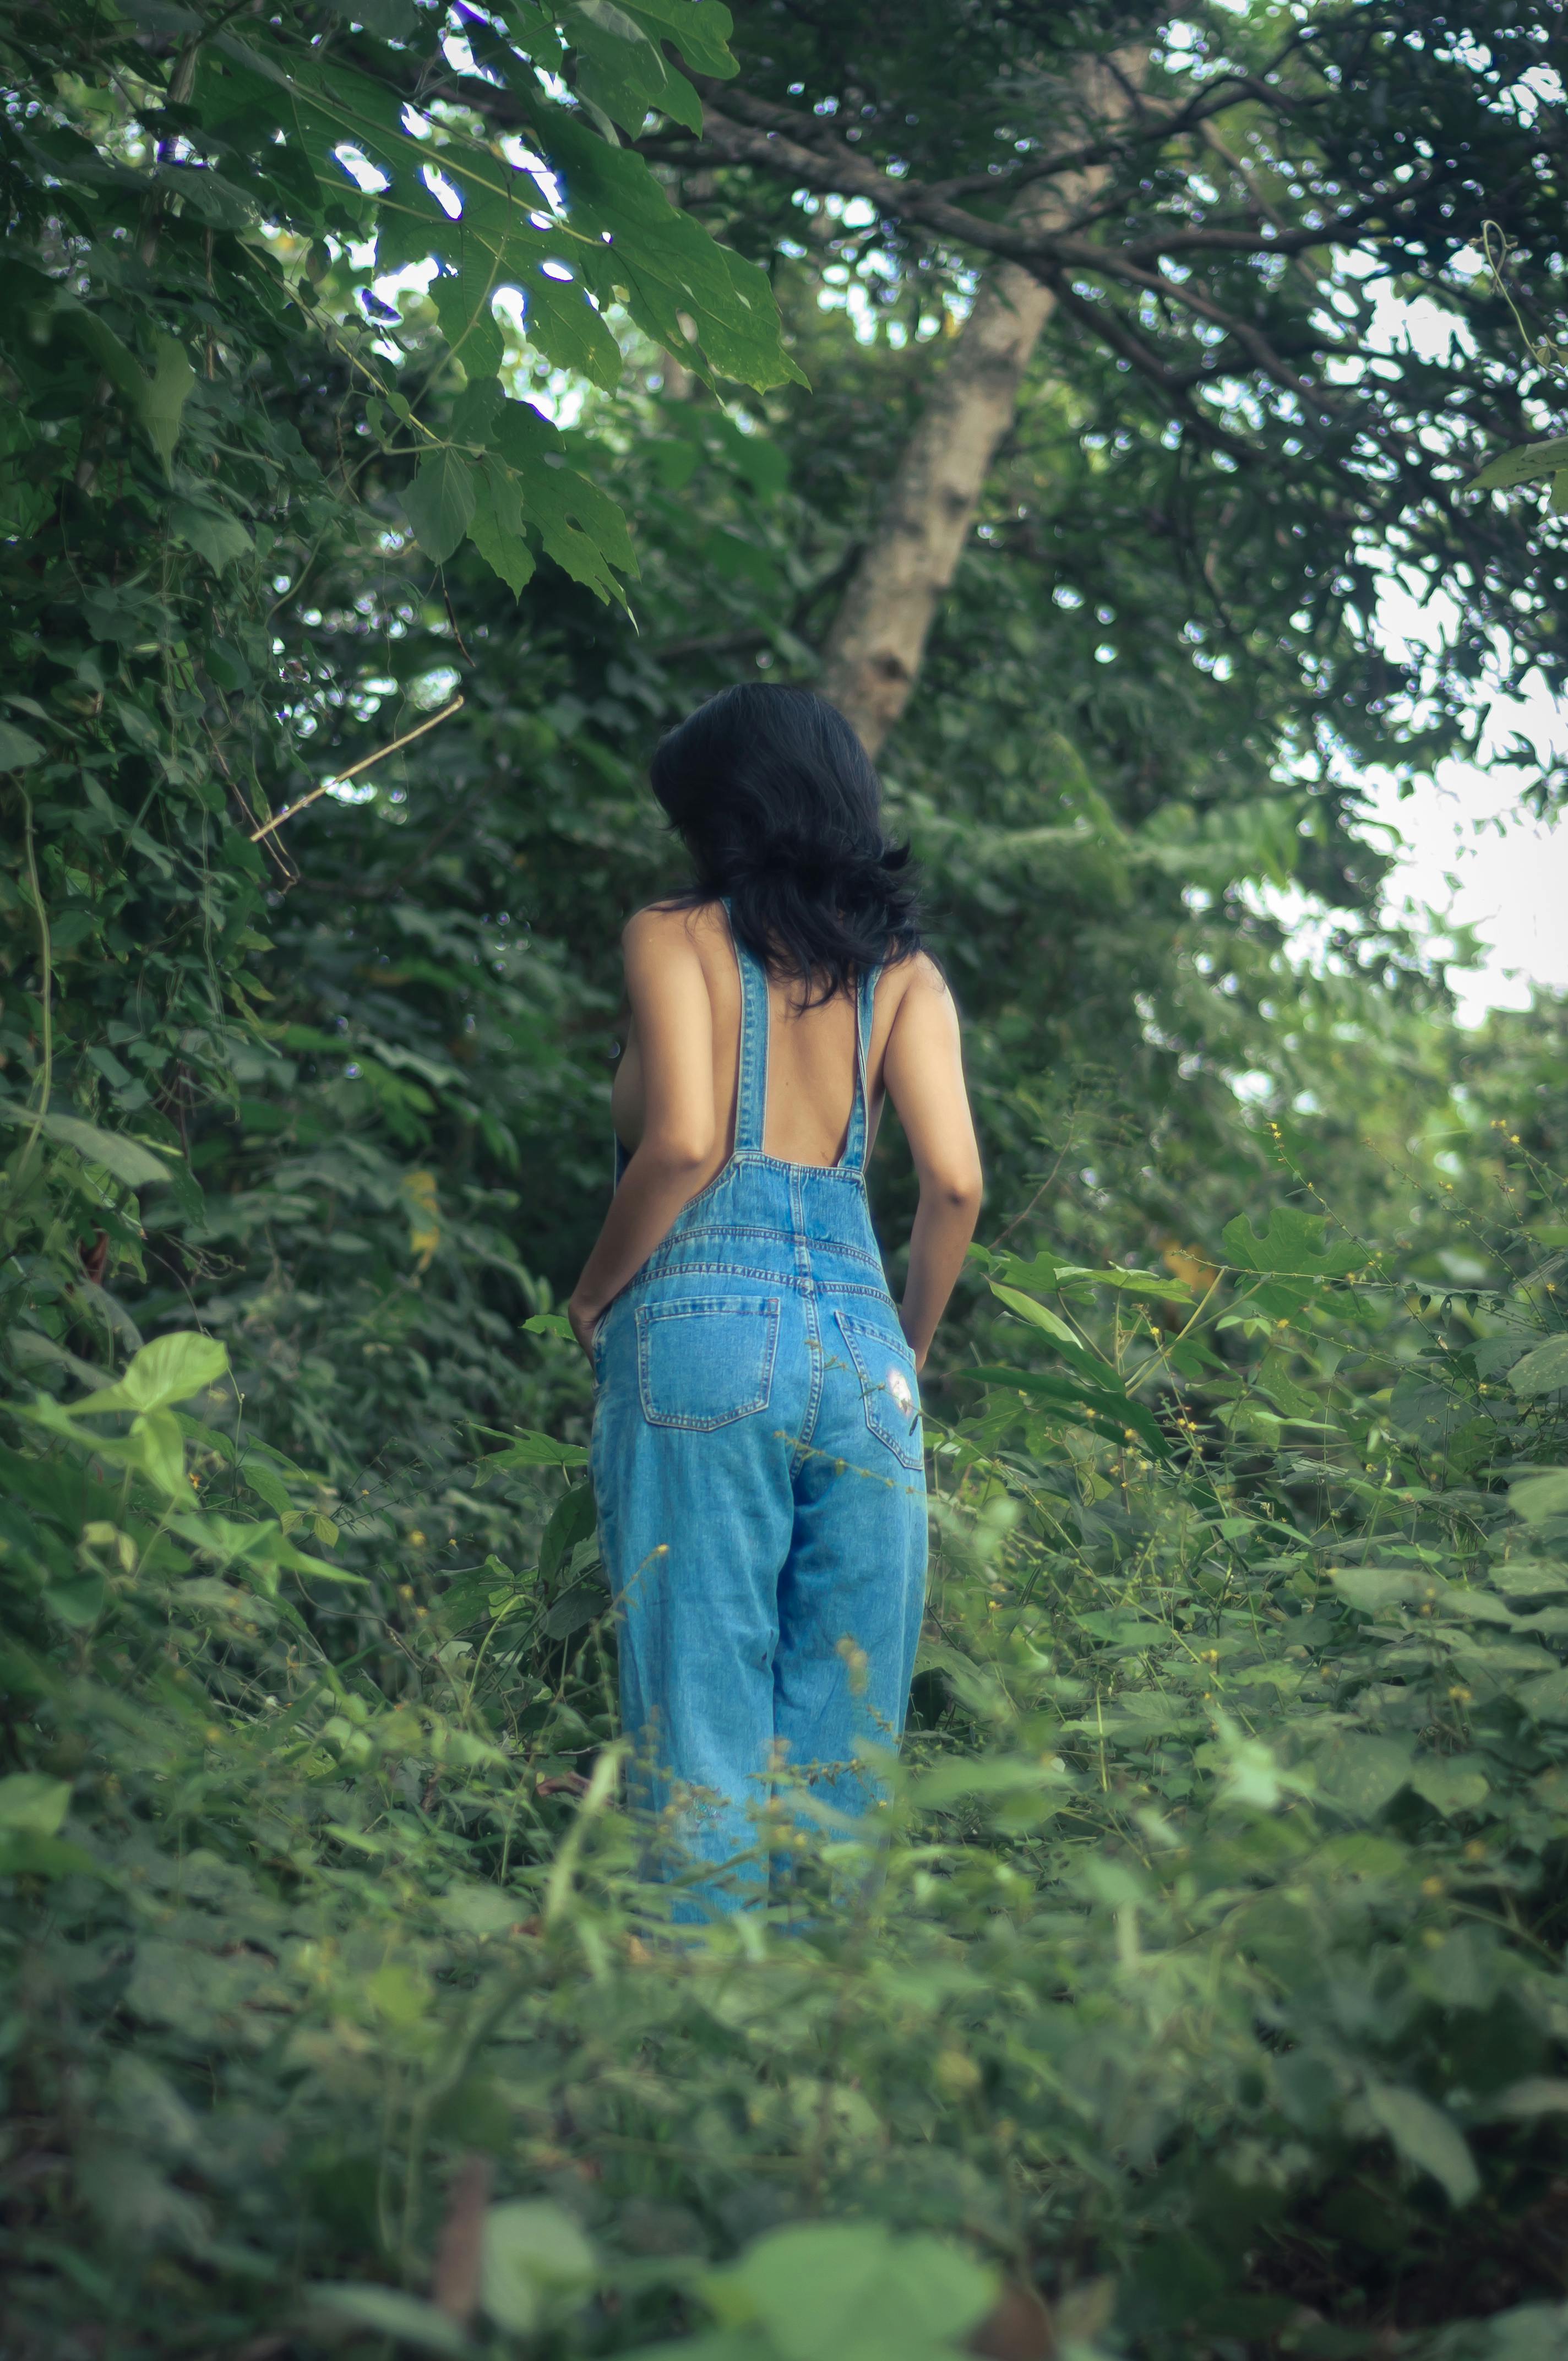 Back View of a Woman in Denim Overalls Standing in a Forest · Free Stock  Photo